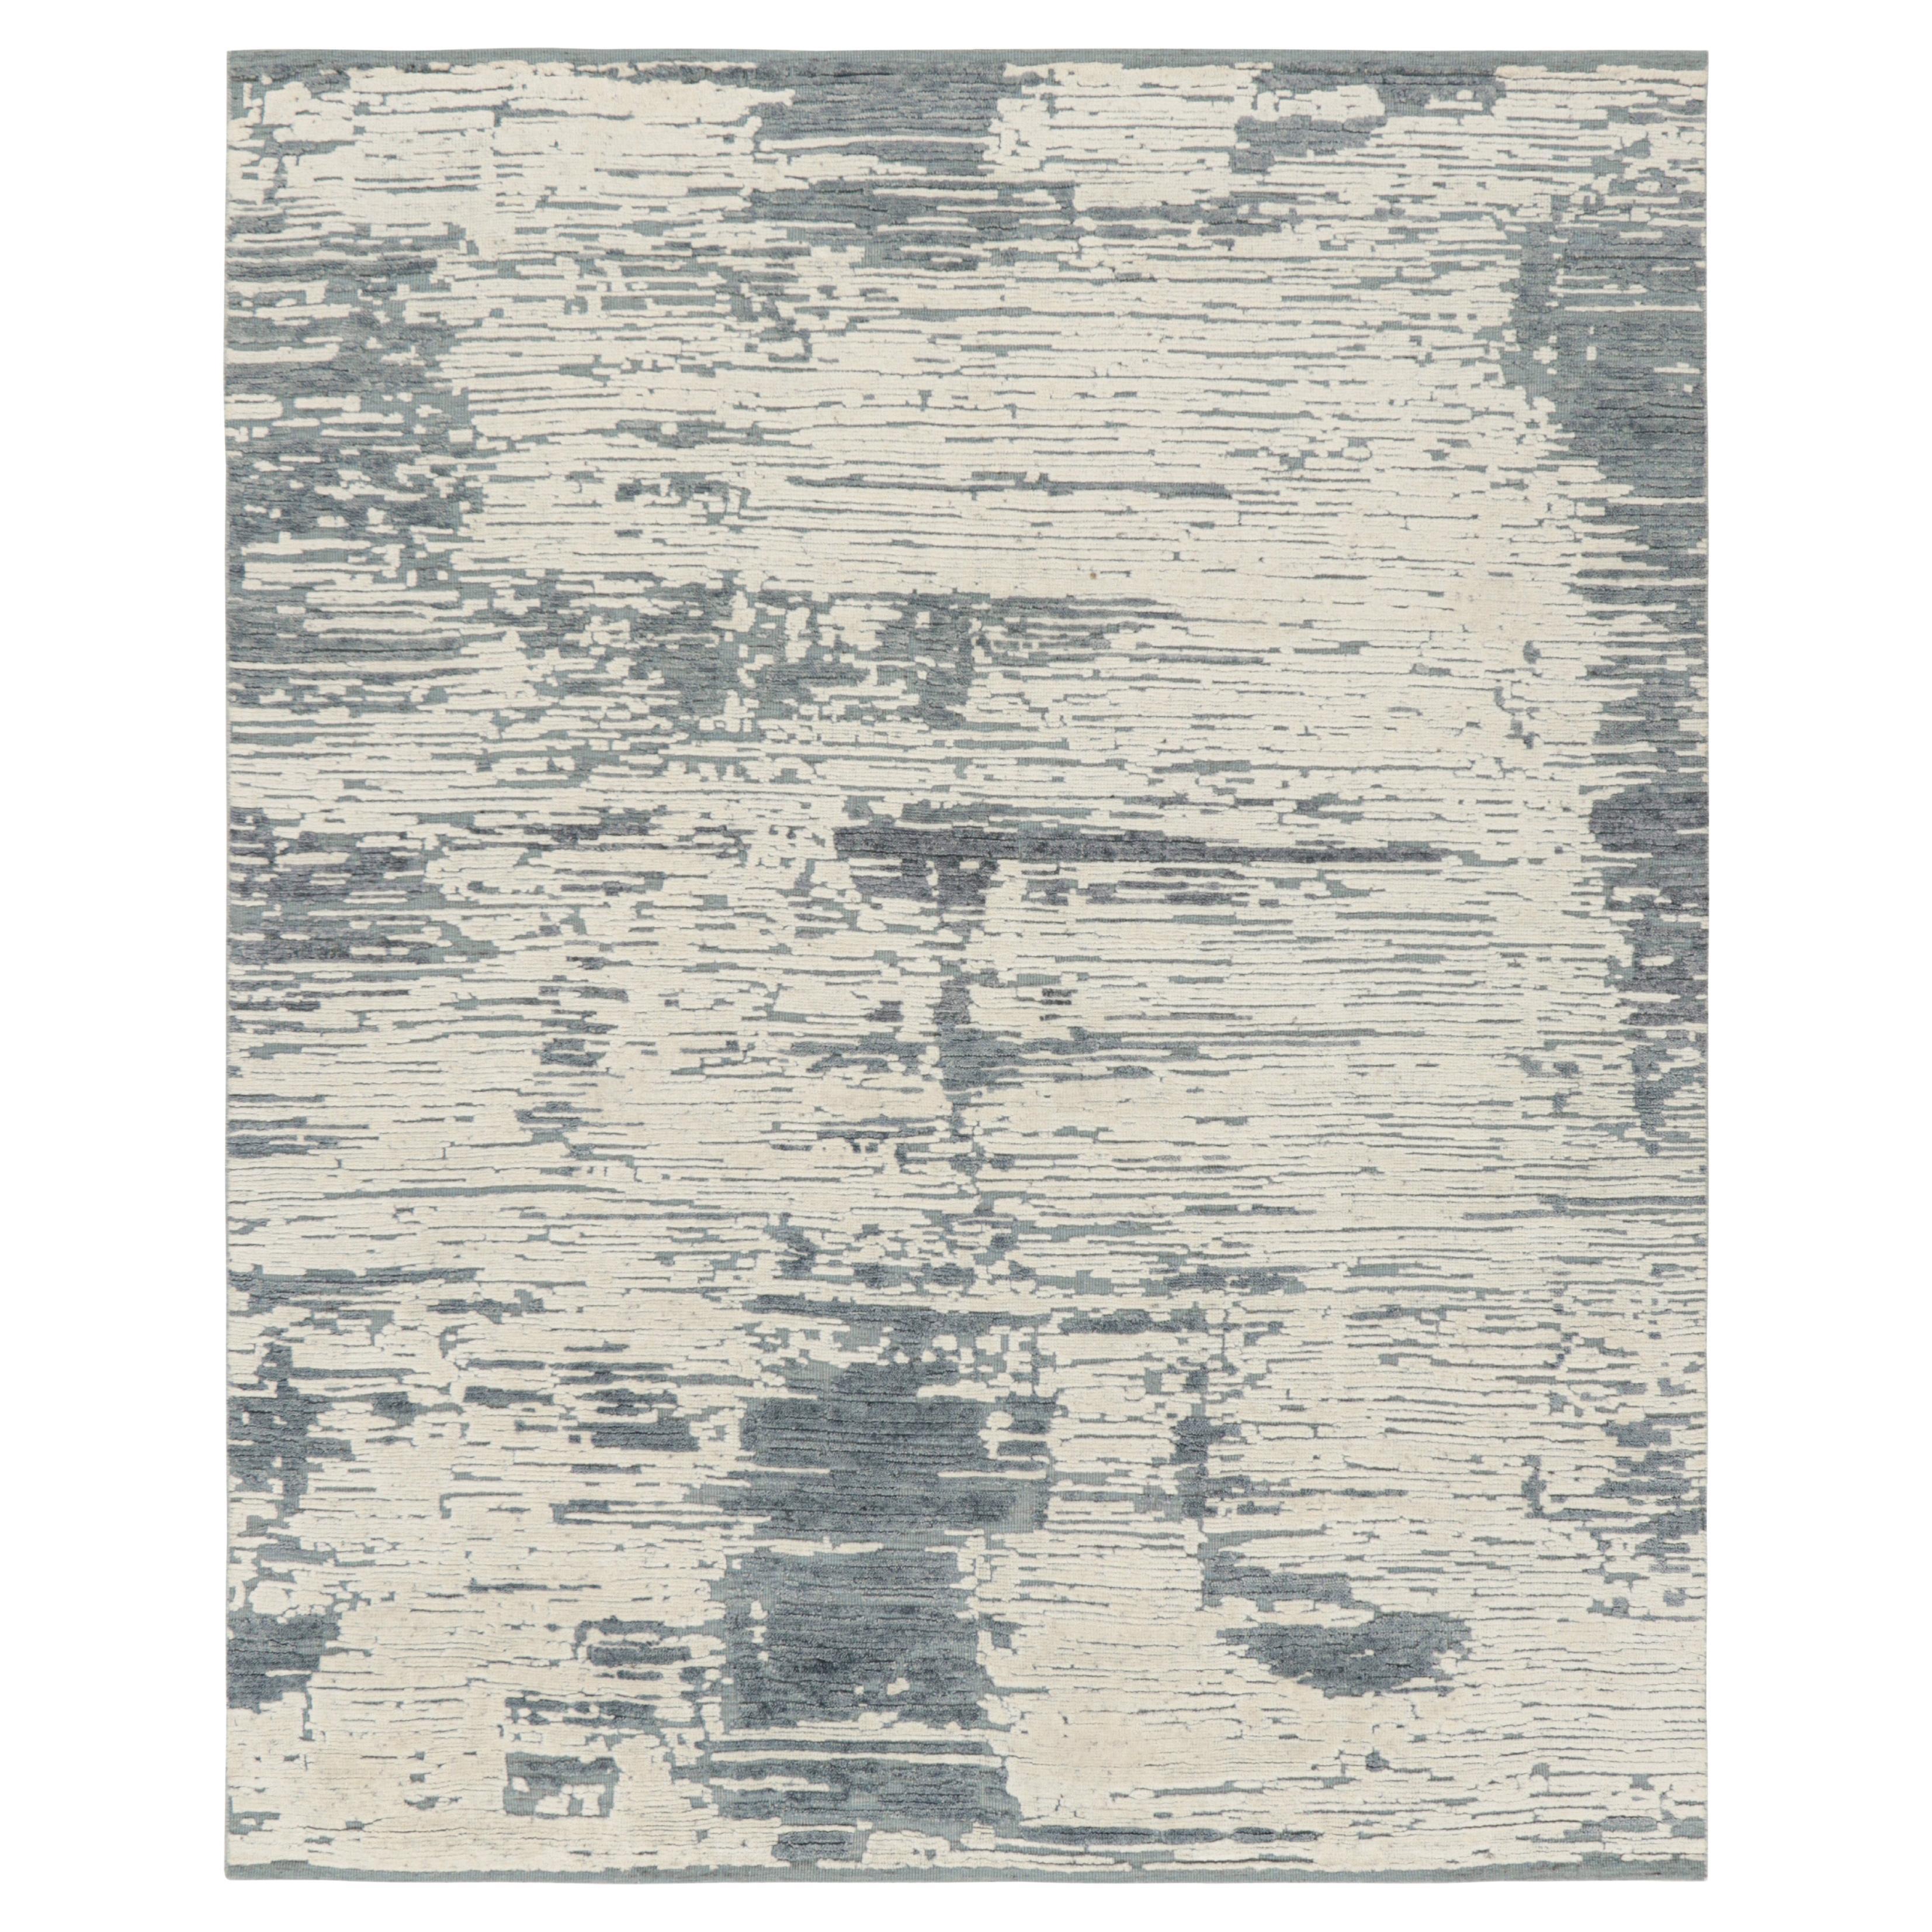 Rug & Kilim’s Abstract Rug in Blue, Cream And White Geometric Patterns For Sale